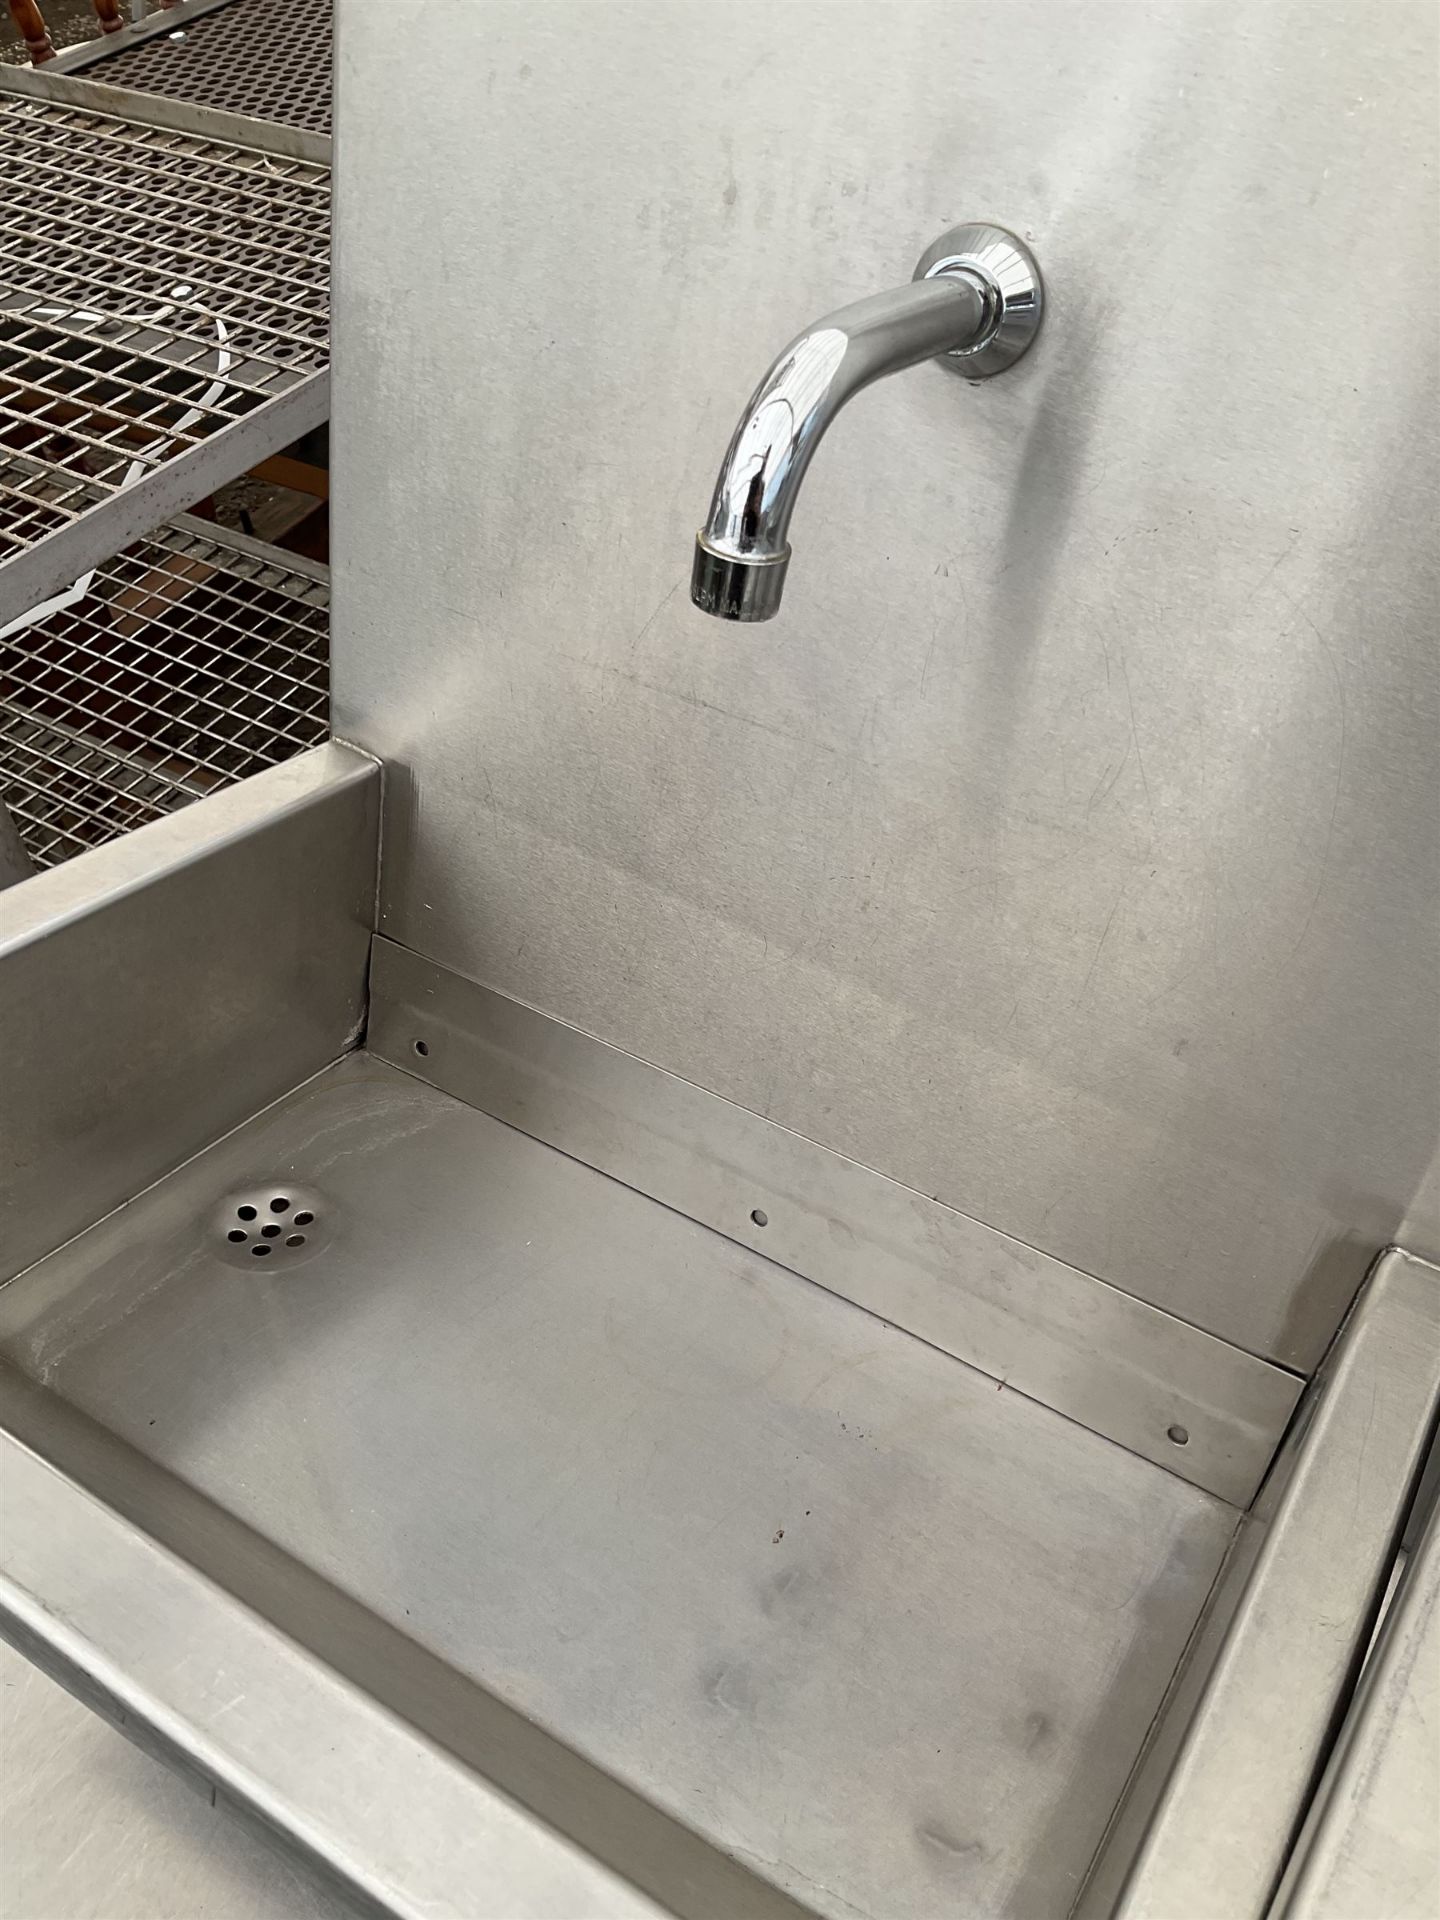 Pair of commercial stainless steel hot and cold hand wash stations - Image 3 of 5